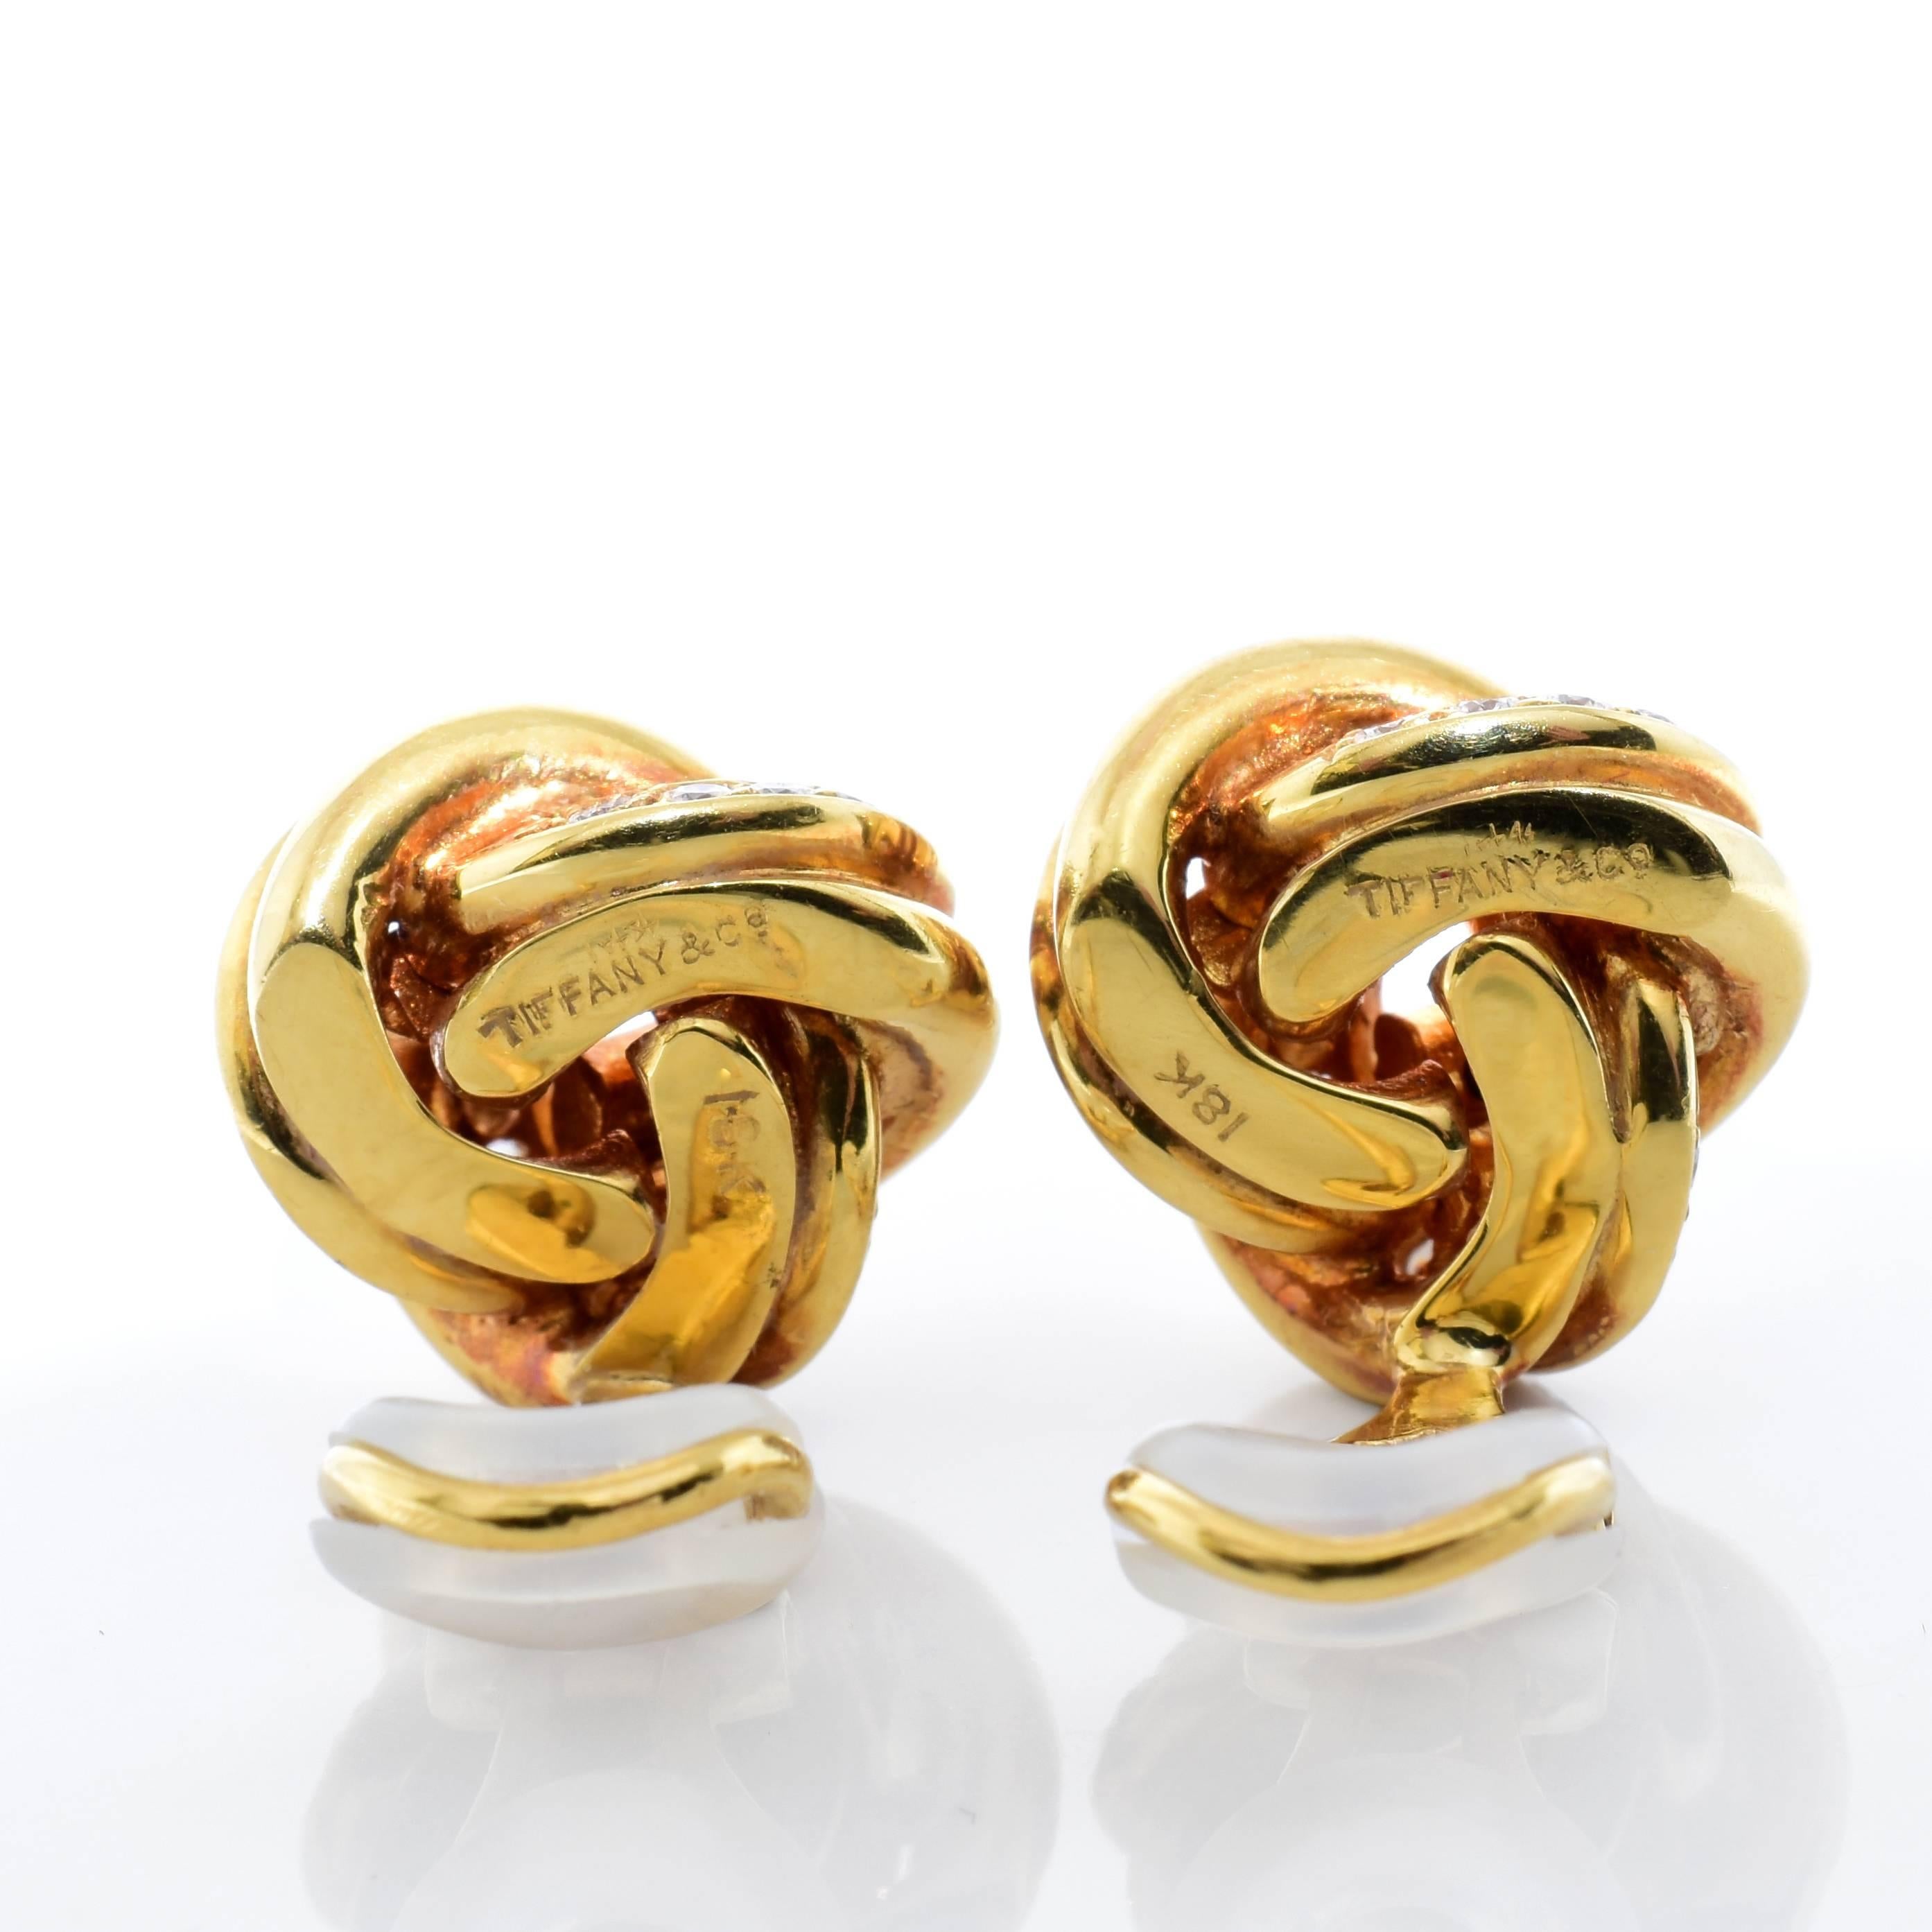 Tiffany & Co. Twist Knot Diamond 18 Karat Yellow Gold Earrings In Excellent Condition For Sale In Los Angeles, CA